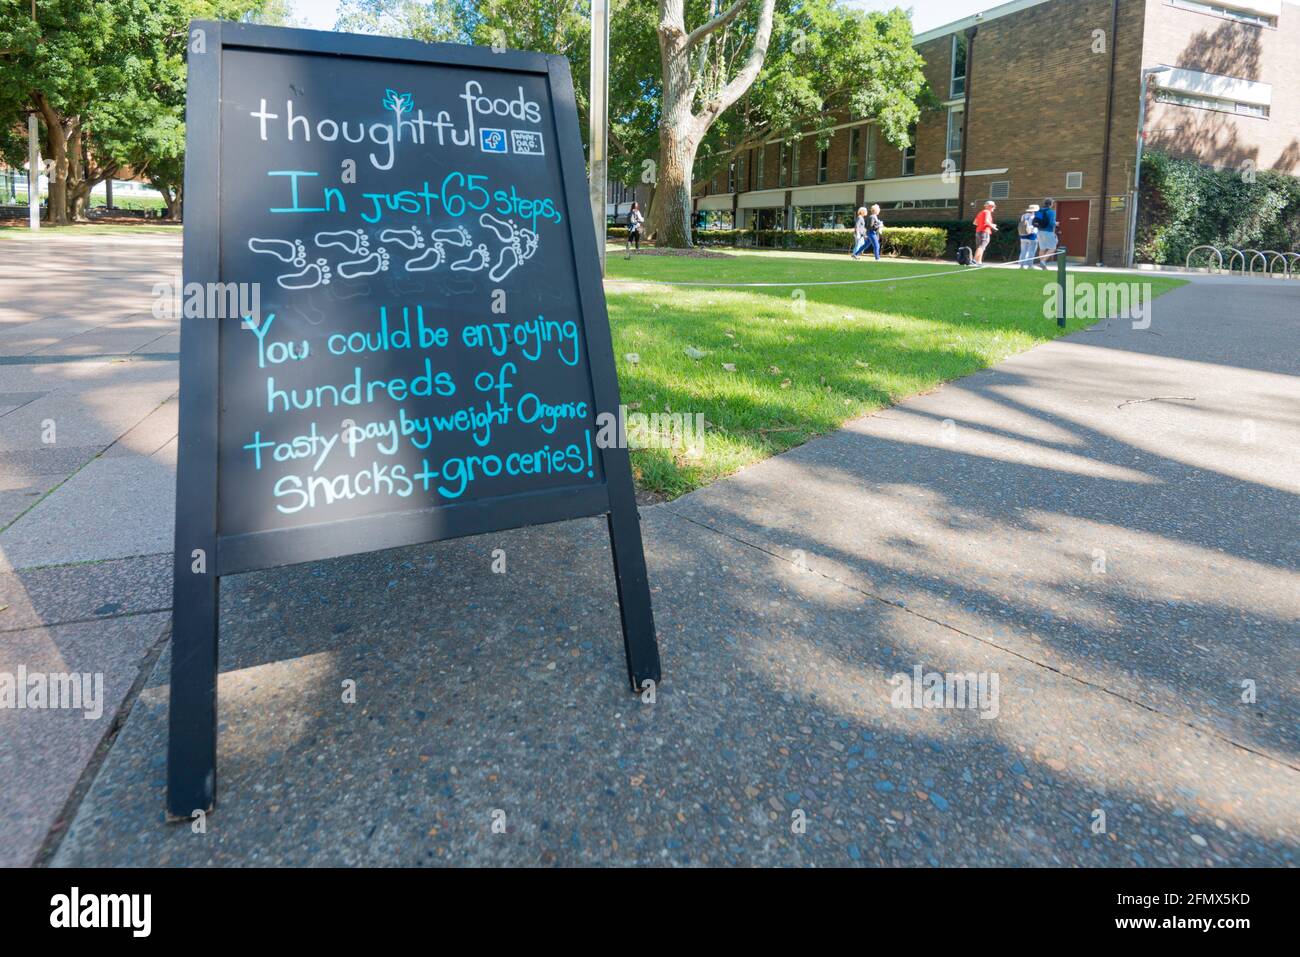 A chalkboard sign at the University of New South Wales in Sydney, Australia advertises organic food and groceries Stock Photo